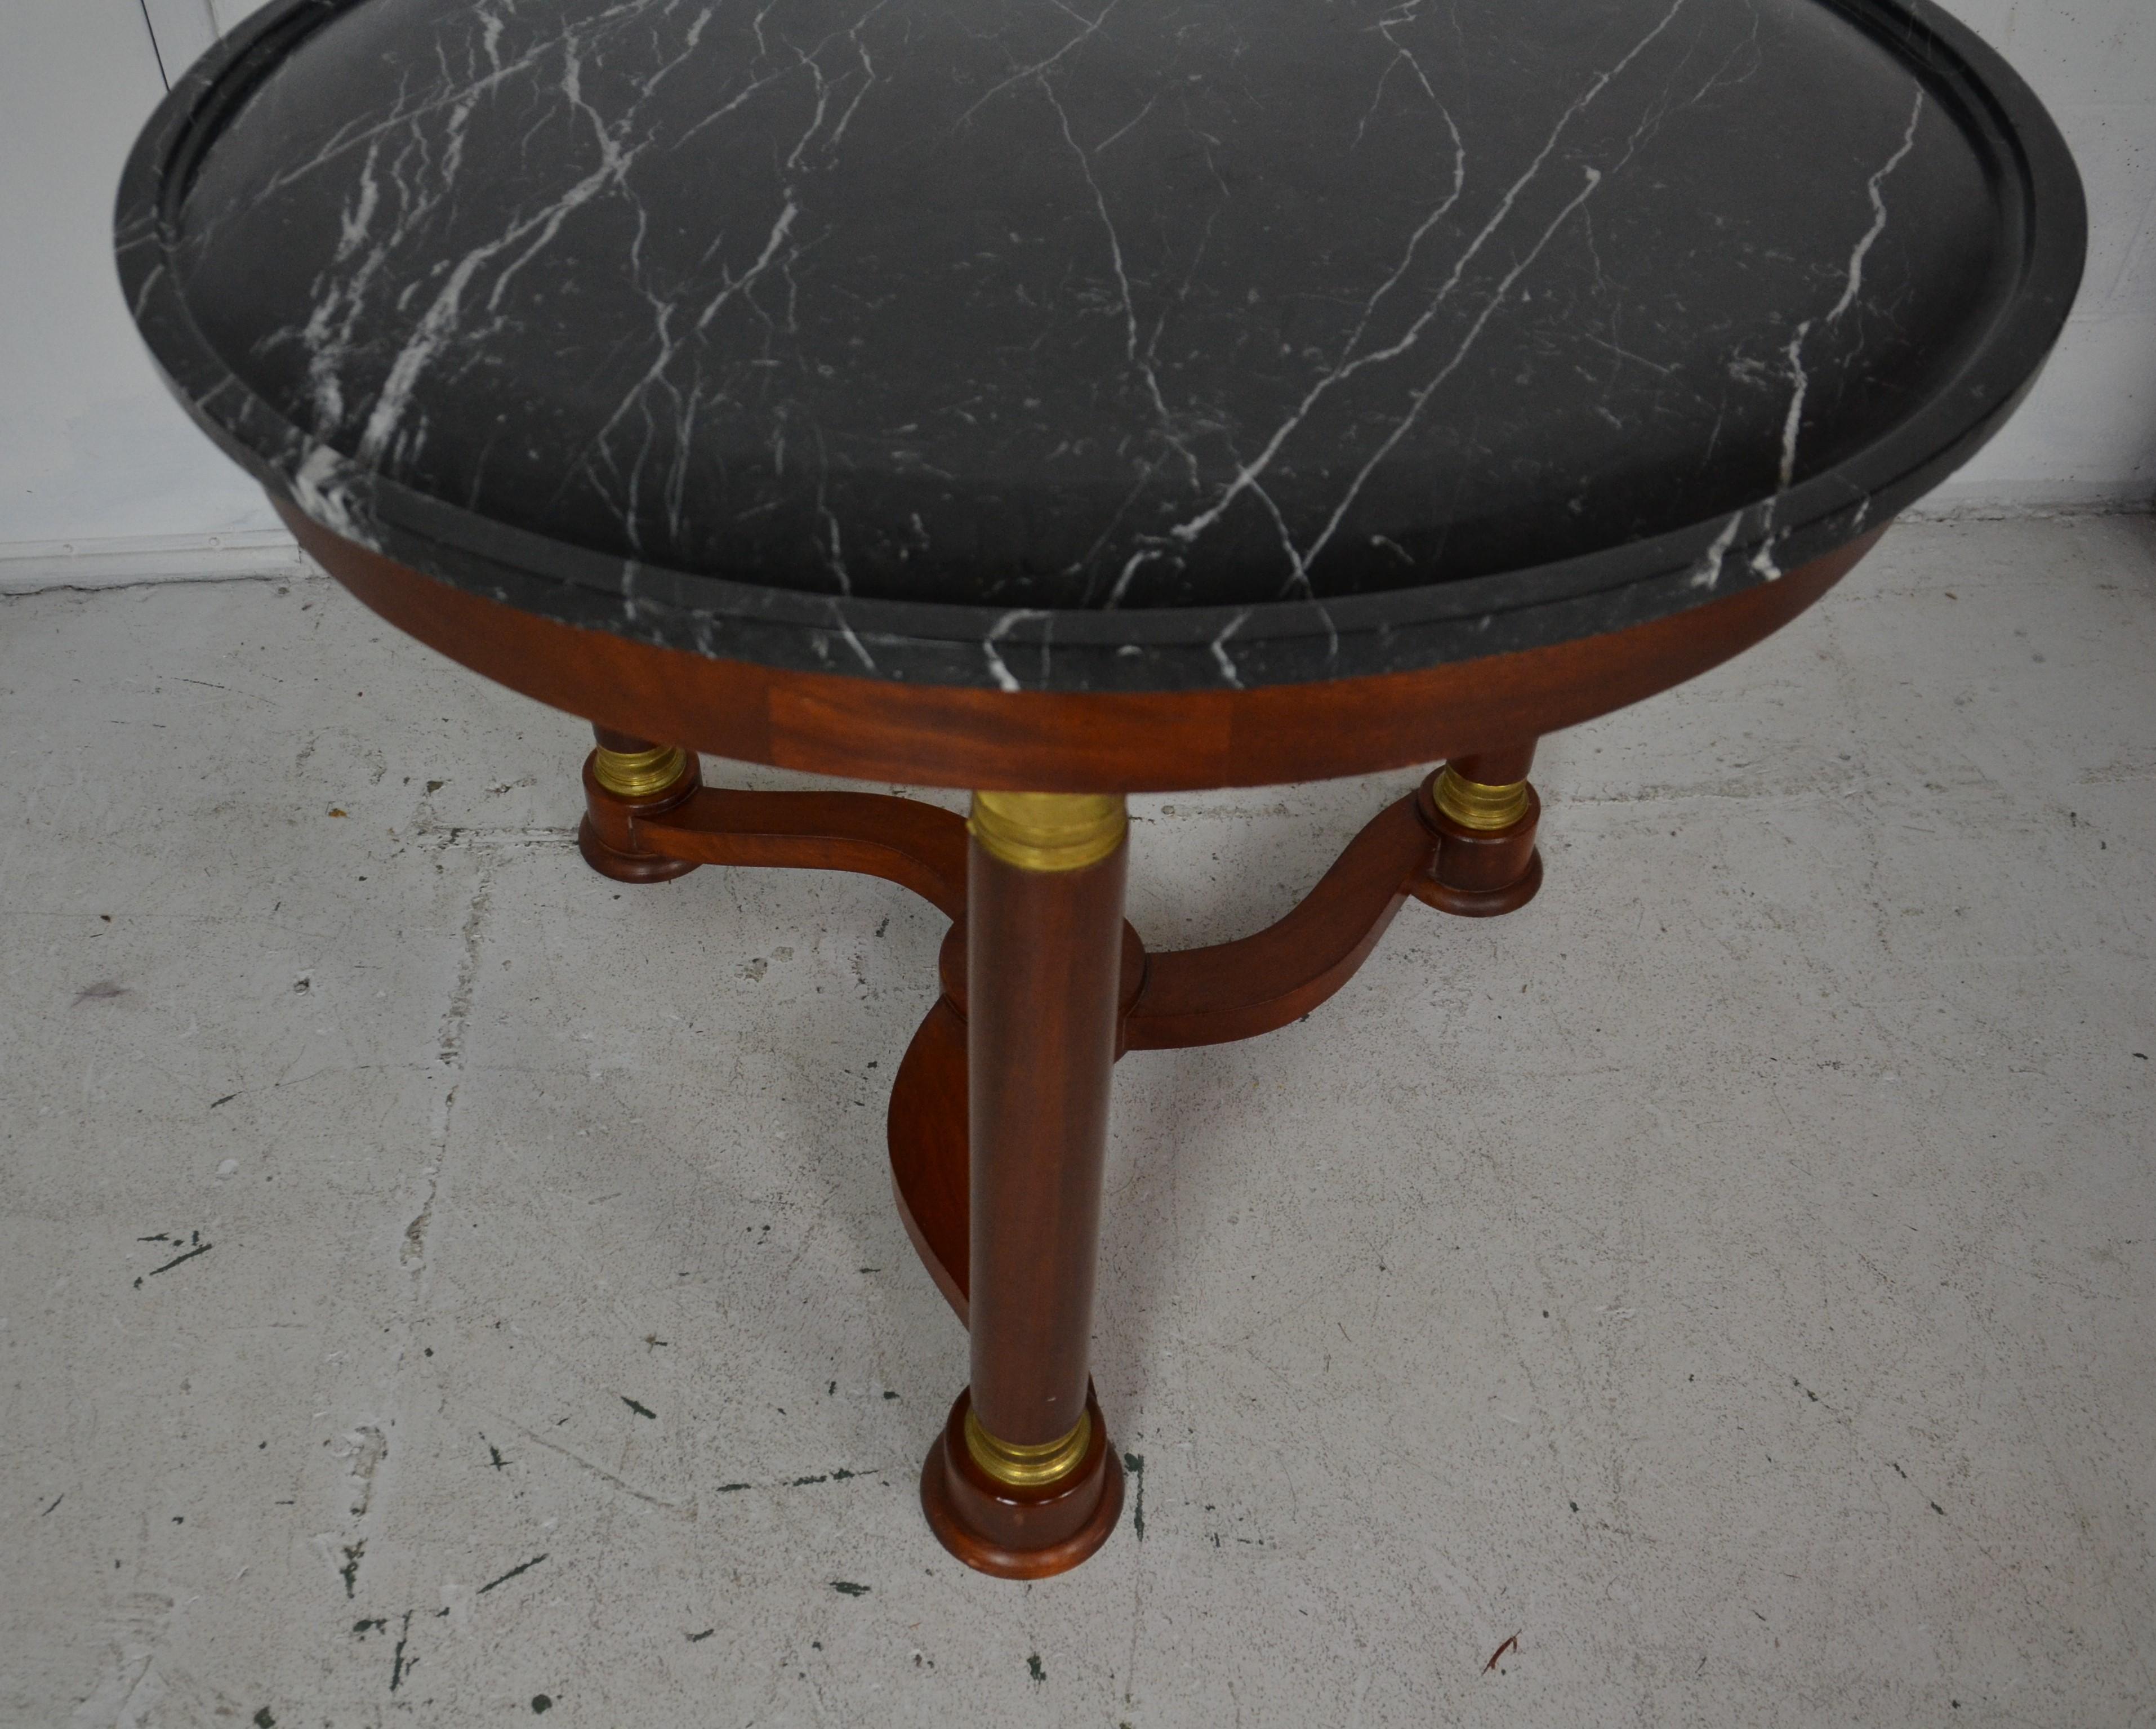 how to identify antique tables